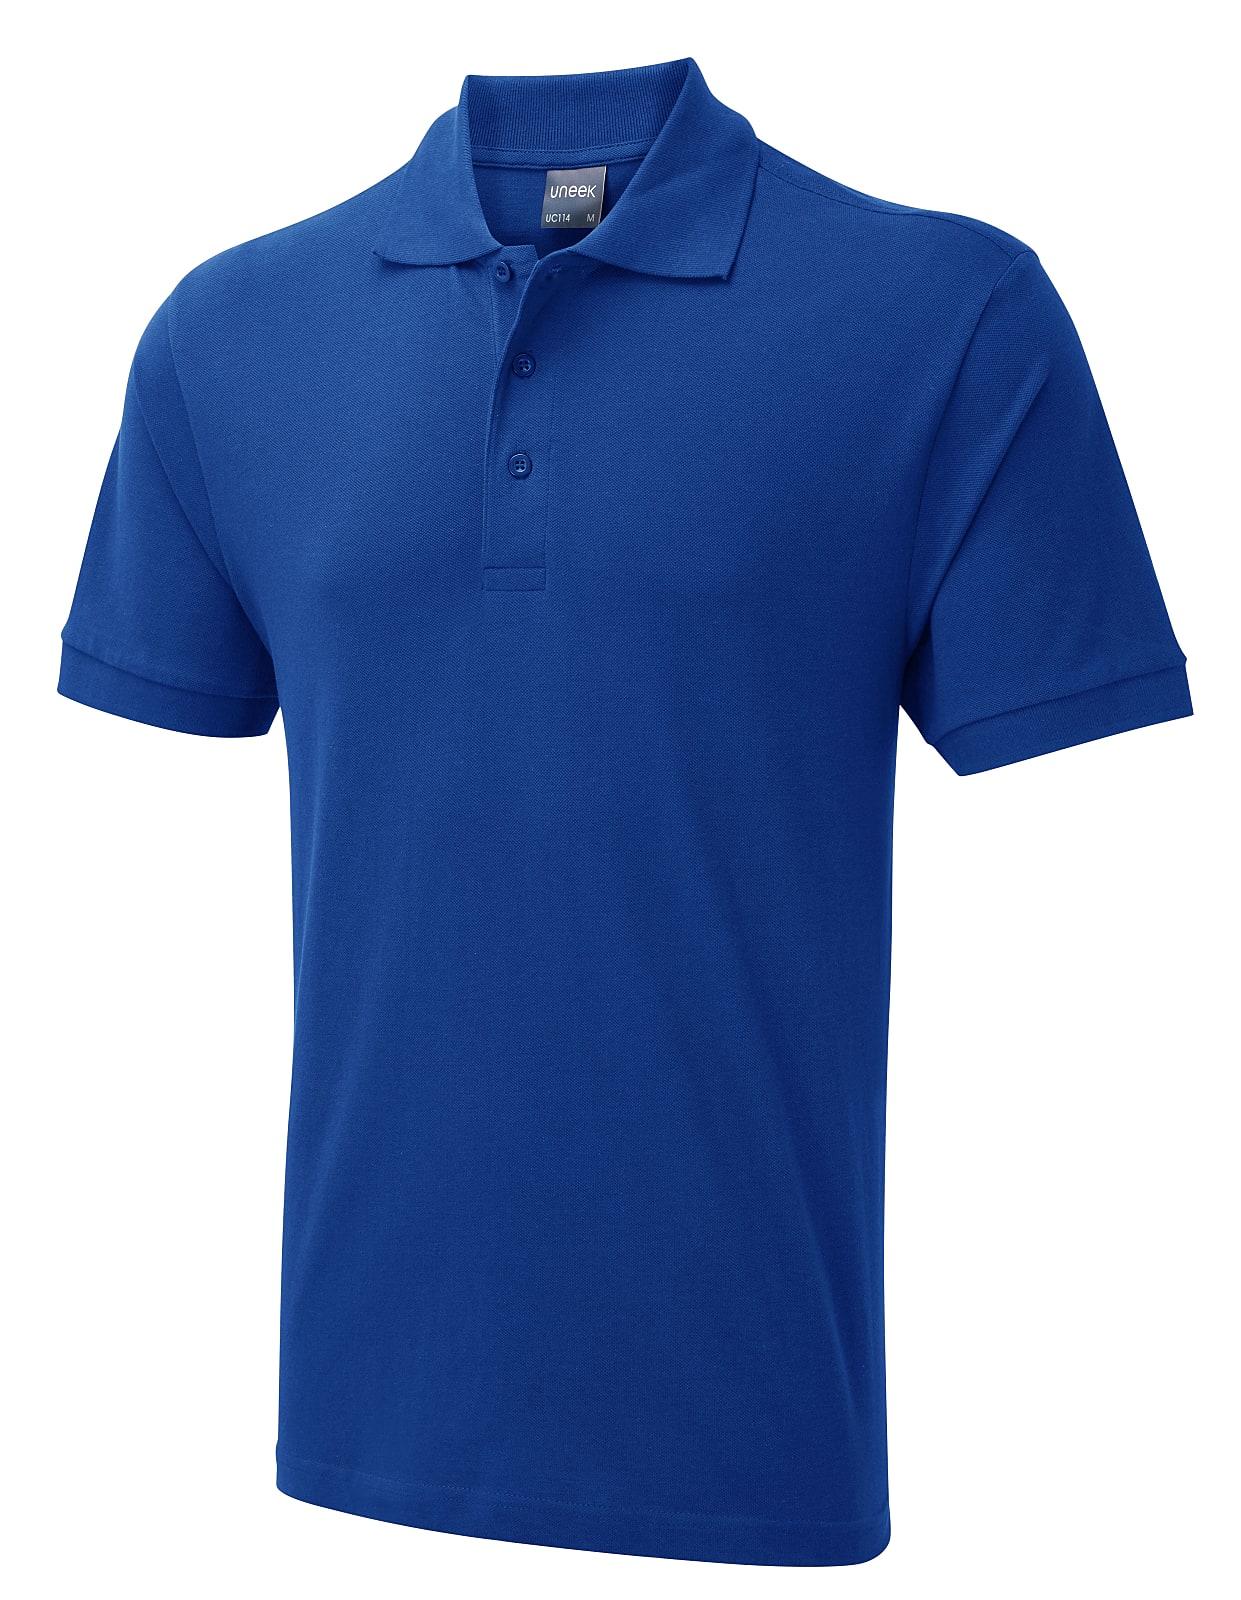 Uneek 180GSM Mens Polo Shirt in Royal Blue (Product Code: UC114)